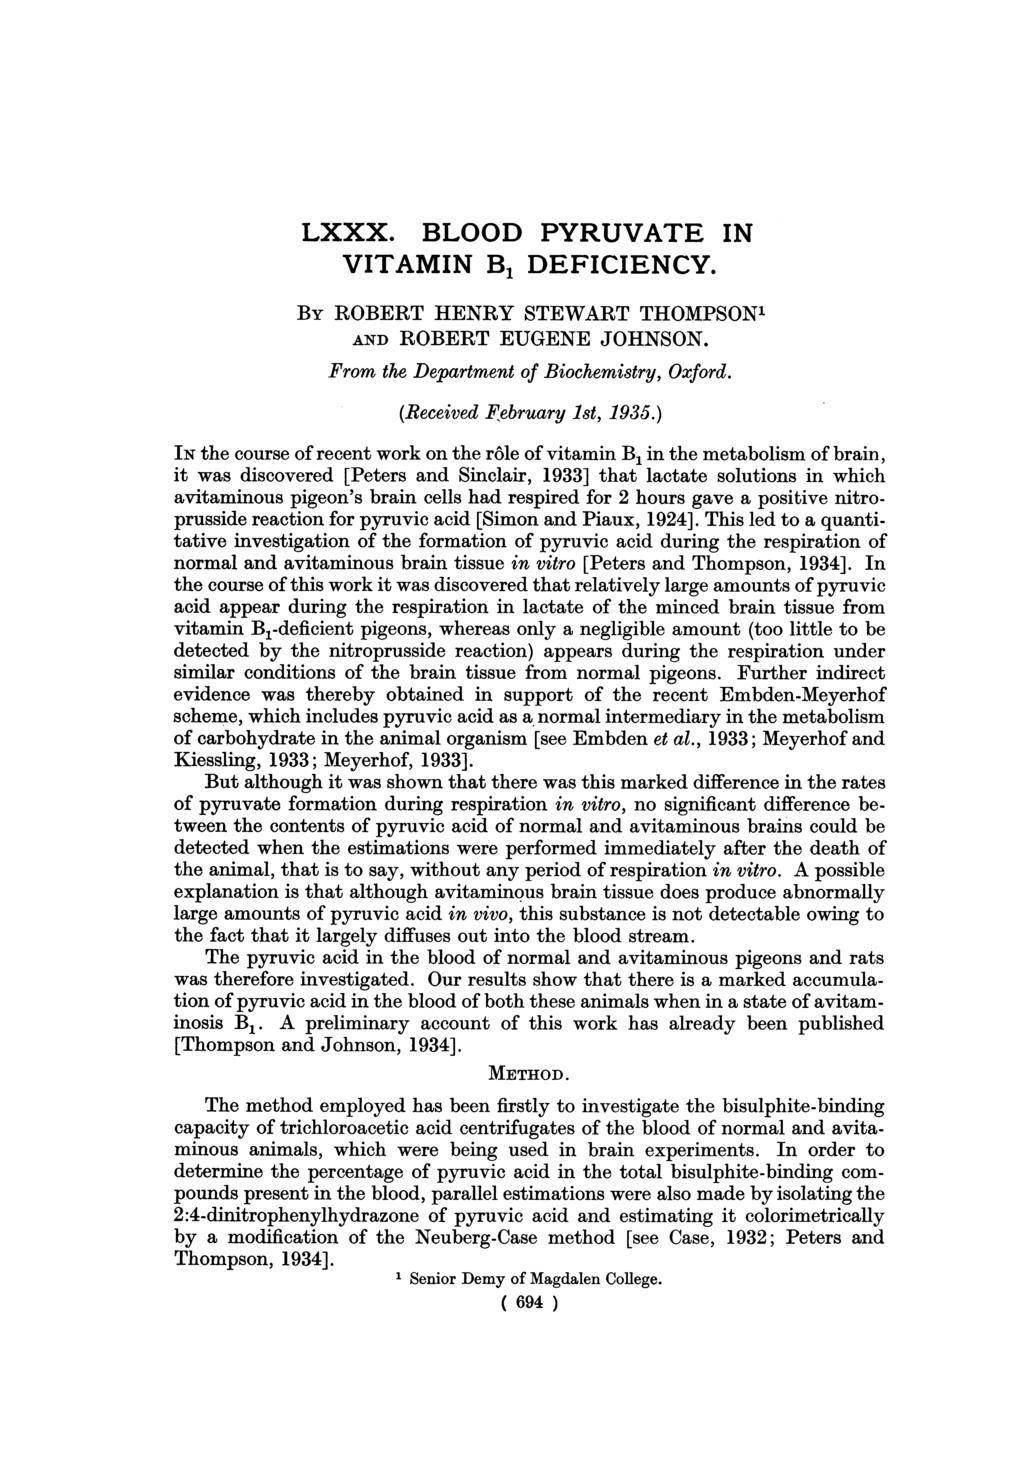 LXXX. BLOOD PYRUVATE IN VITAMIN B1 DEFICIENCY. BY ROBERT HENRY STEWART THOMPSON' AND ROBERT EUGENE JOHNSON. From the Department of Biochemistry, Oxford. (Received February 1st, 1935.